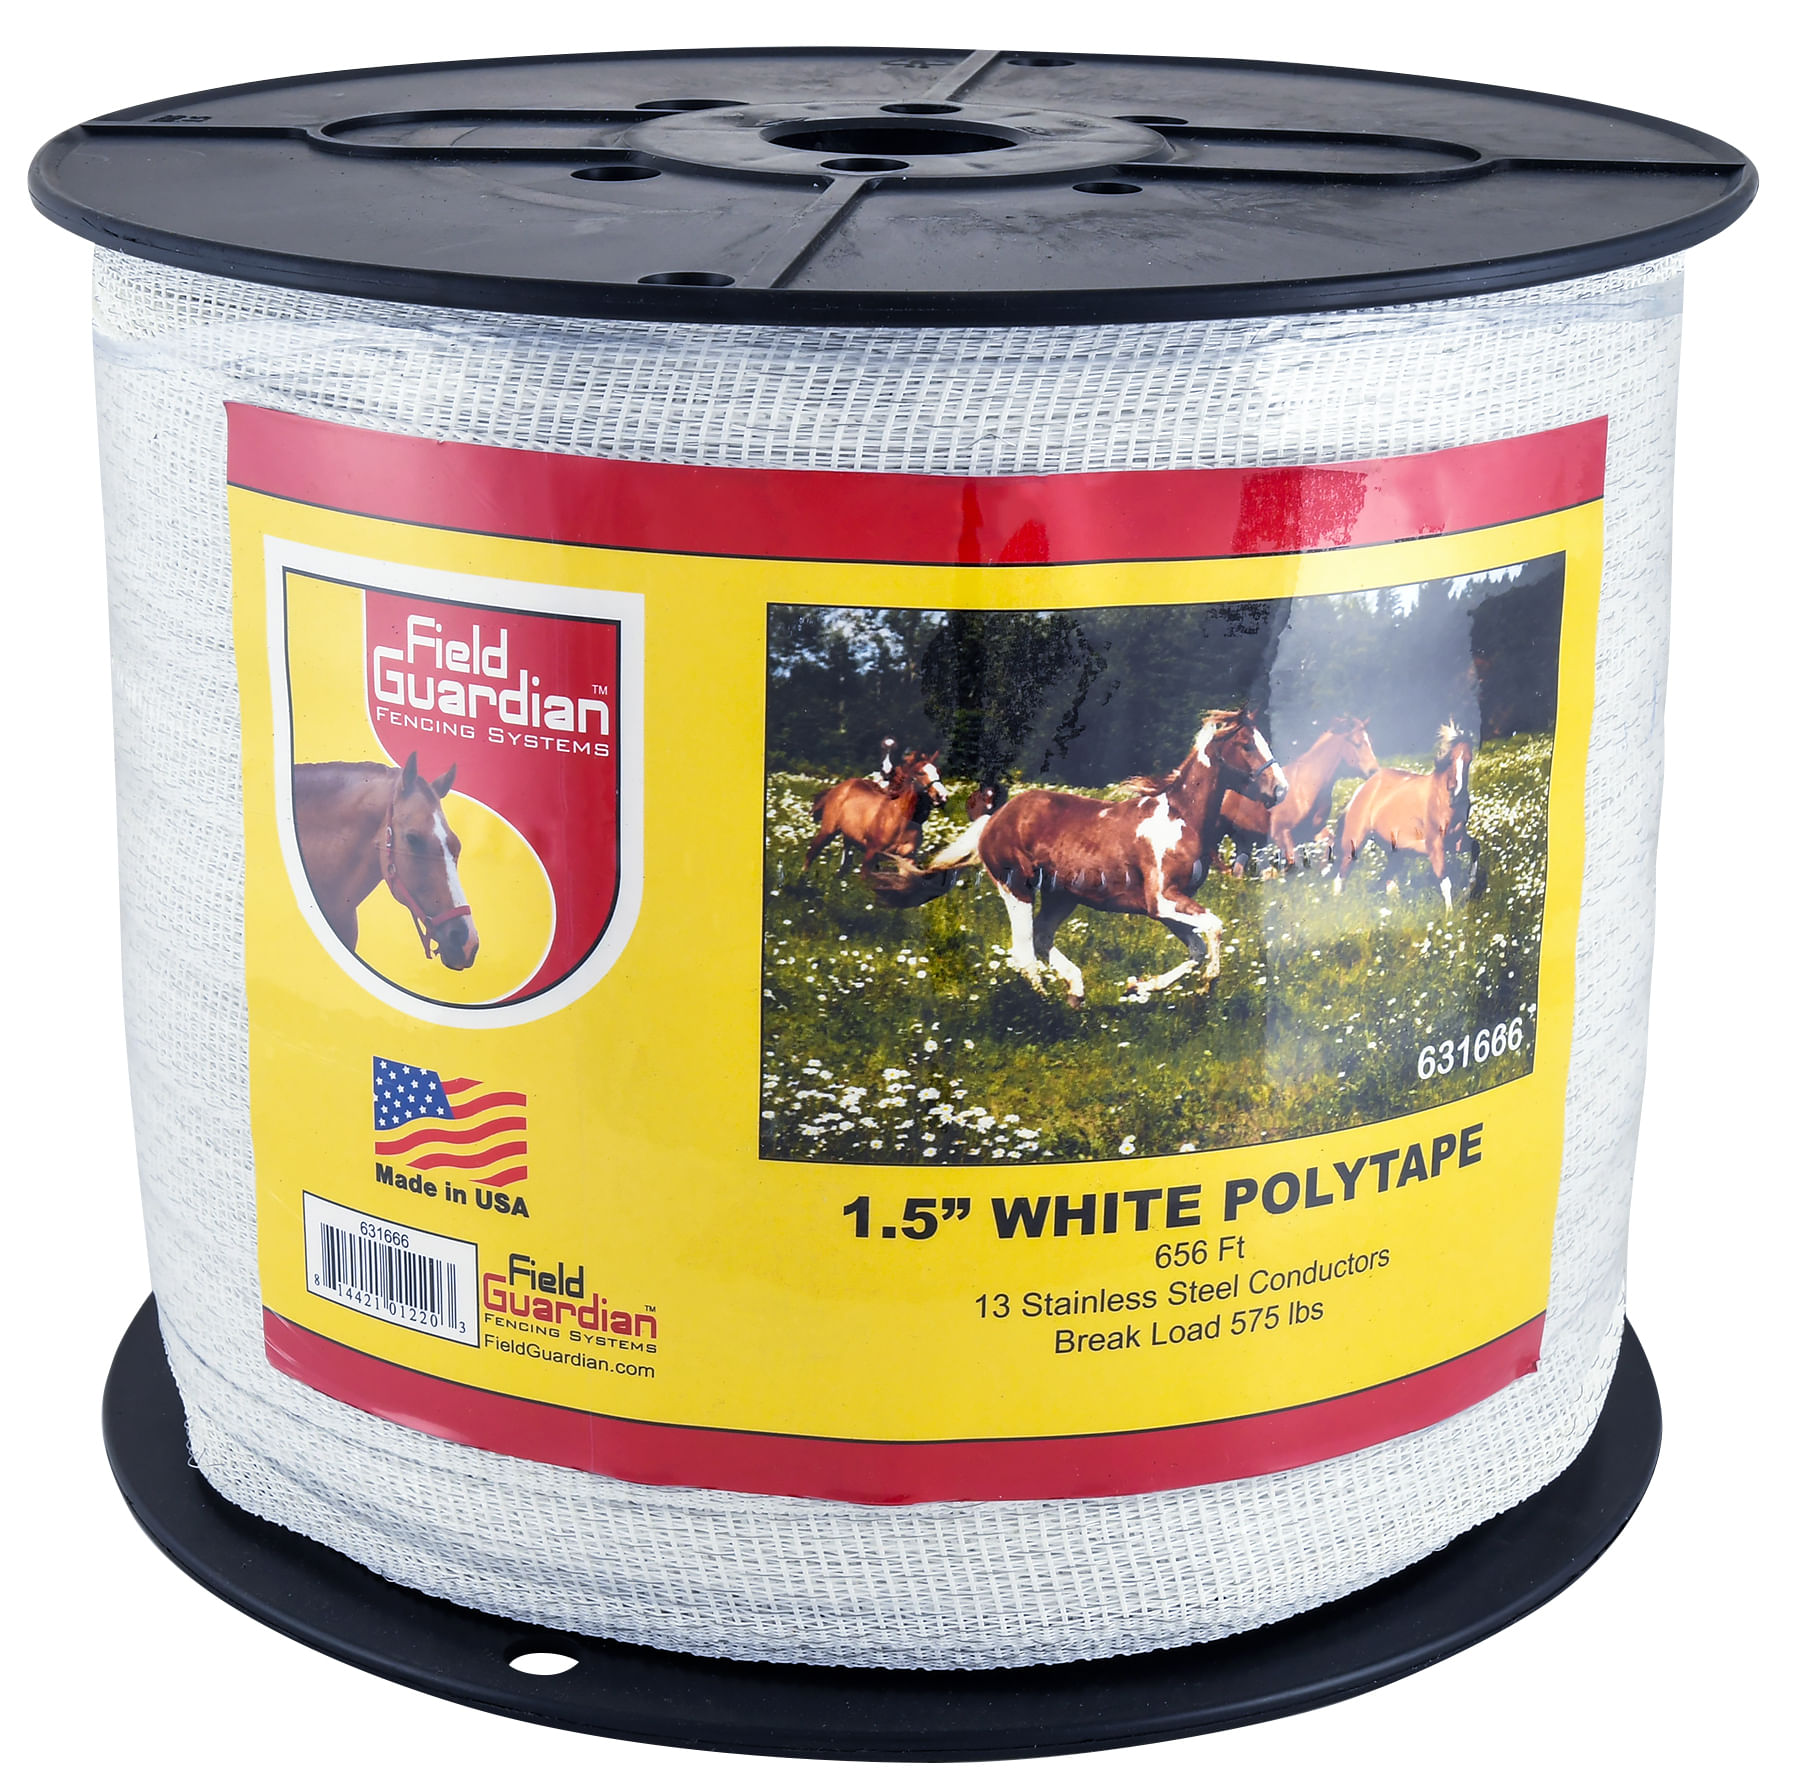 White Field Guardian Classic Polytape 1.5-Inch 